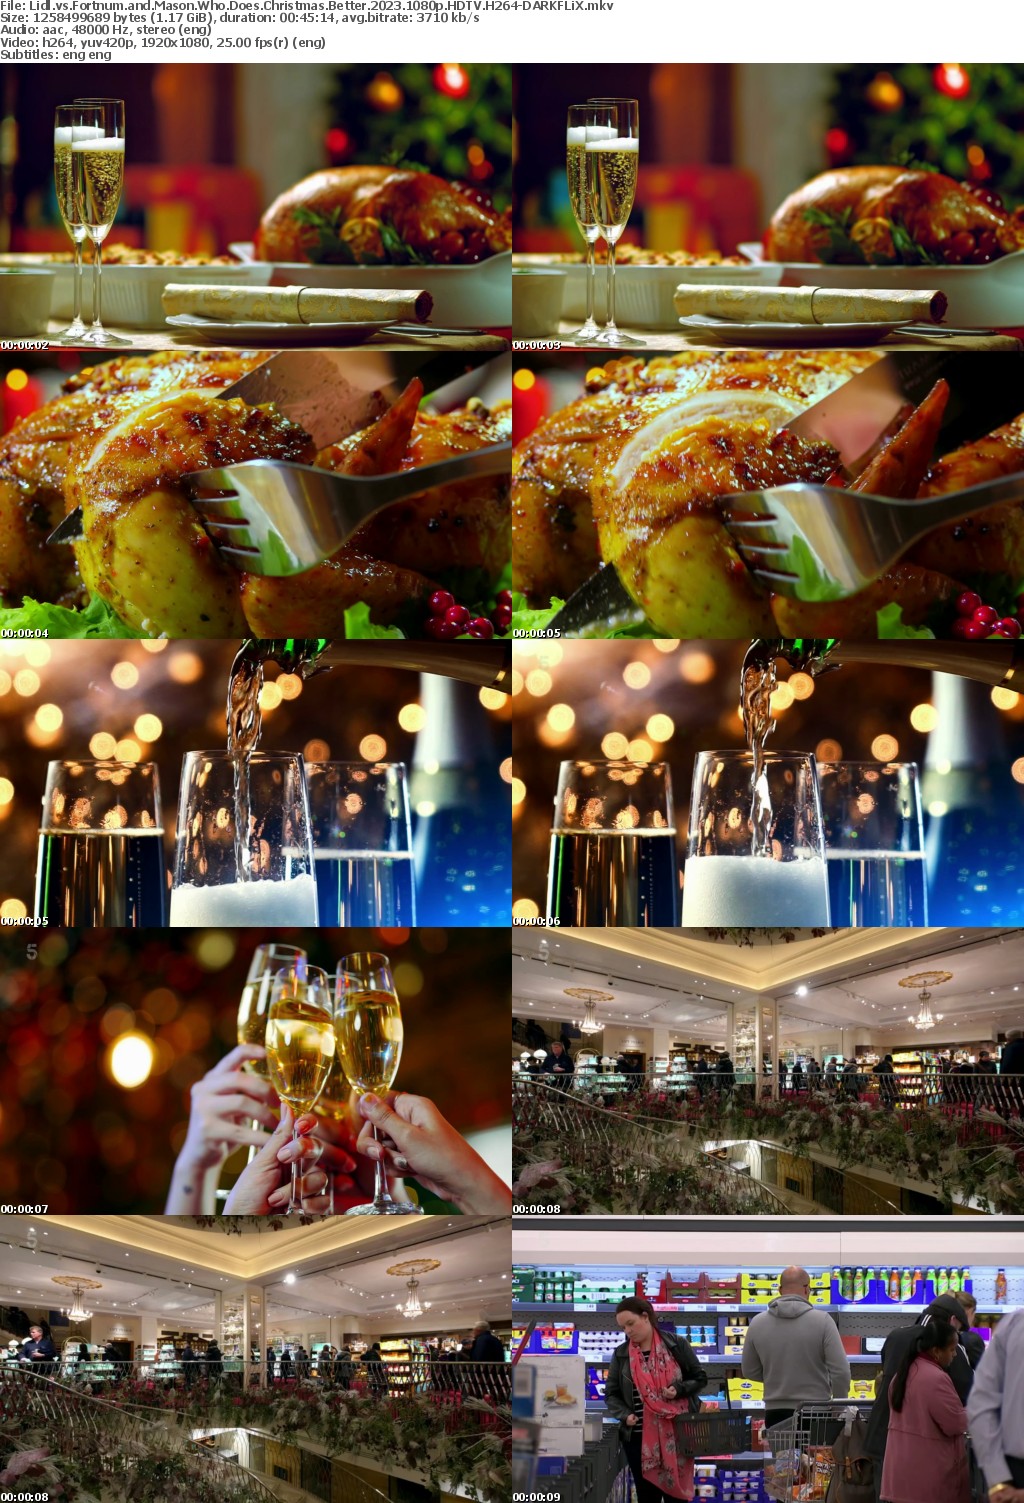 Lidl vs Fortnum and Mason Who Does Christmas Better 2023 1080p HDTV H264-DARKFLiX